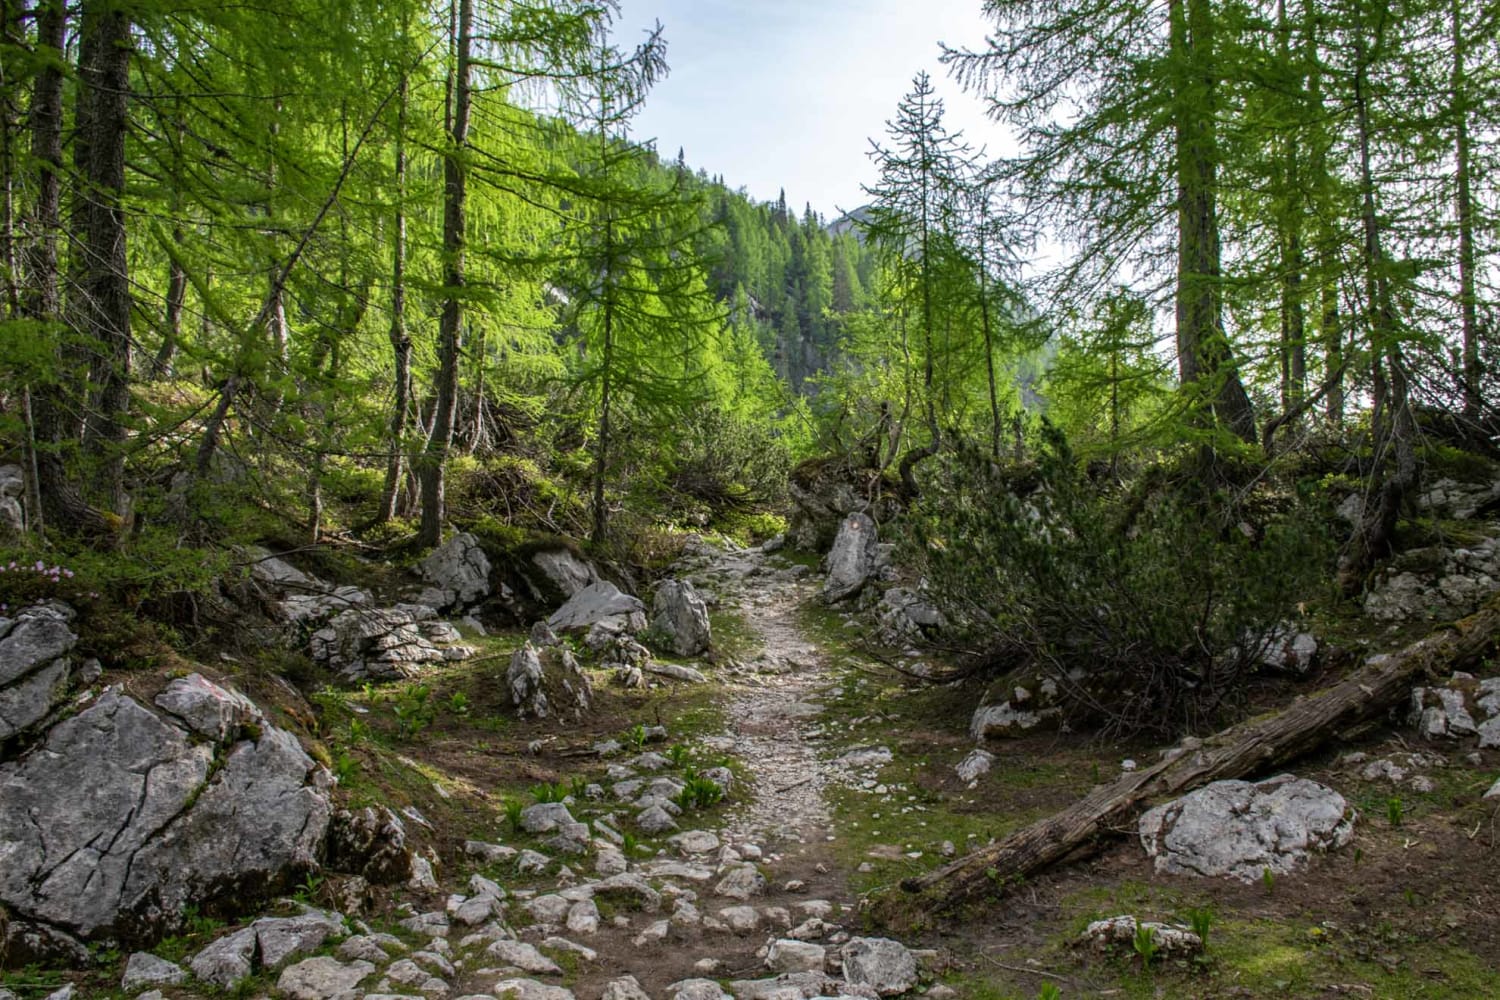 21 Photos to Inspire Your First Slovenia Trip